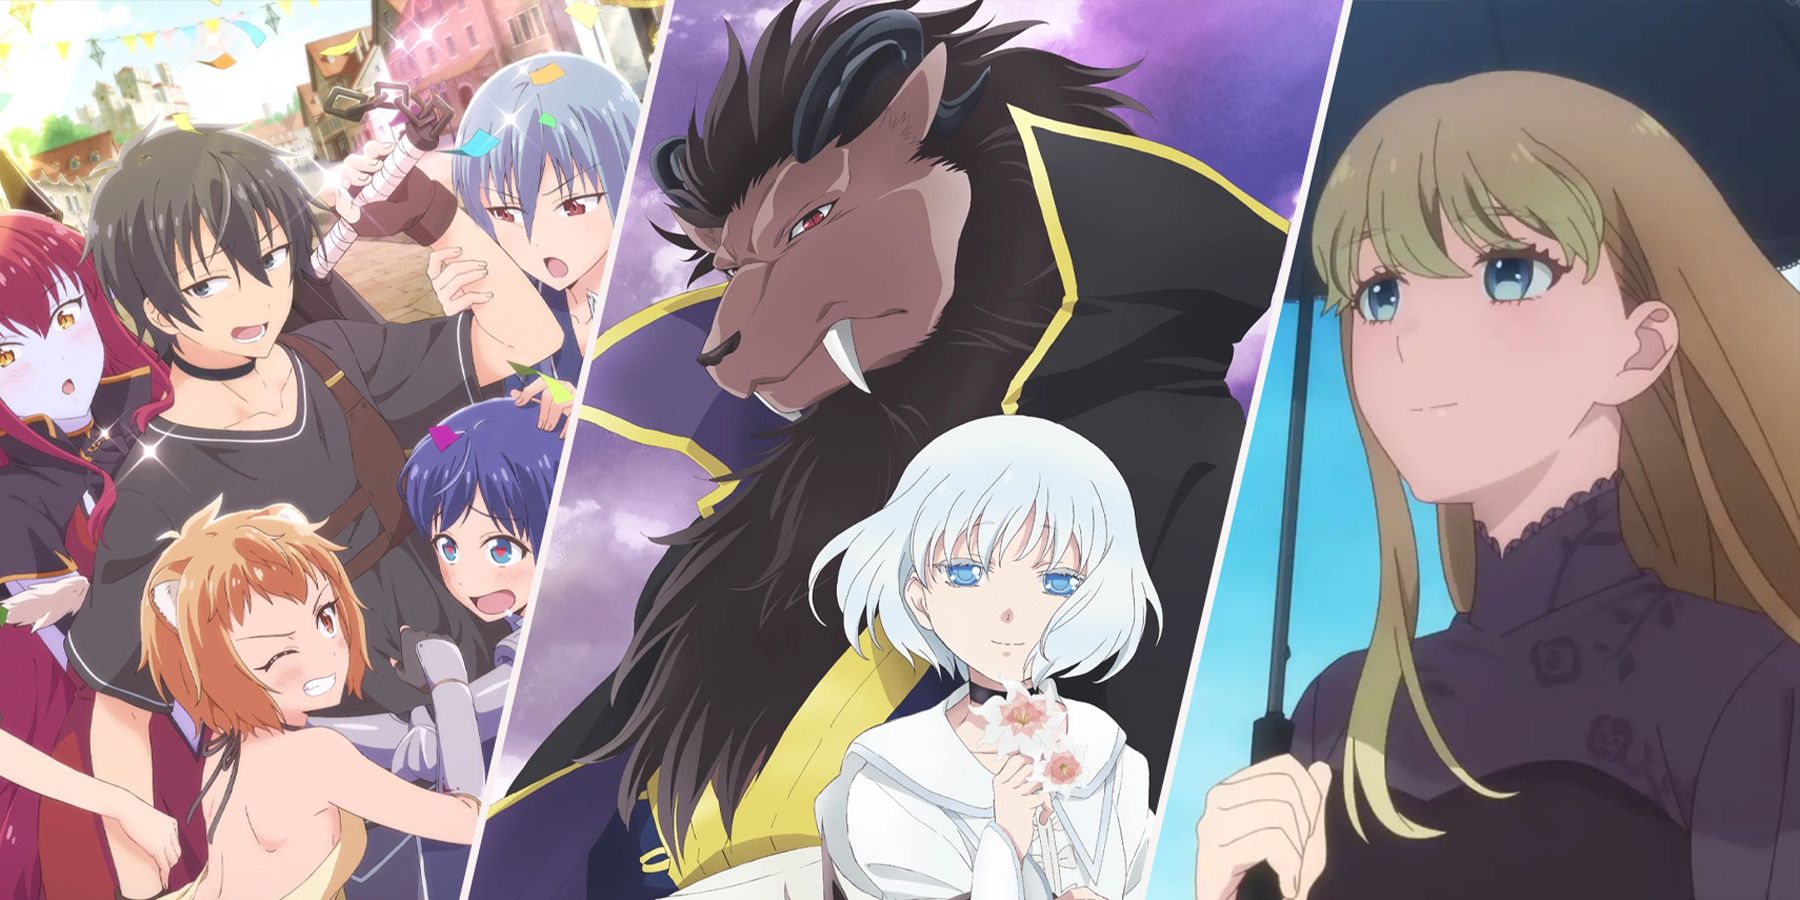 ANIME SPRING 2023: Complete list with dates + Trailers